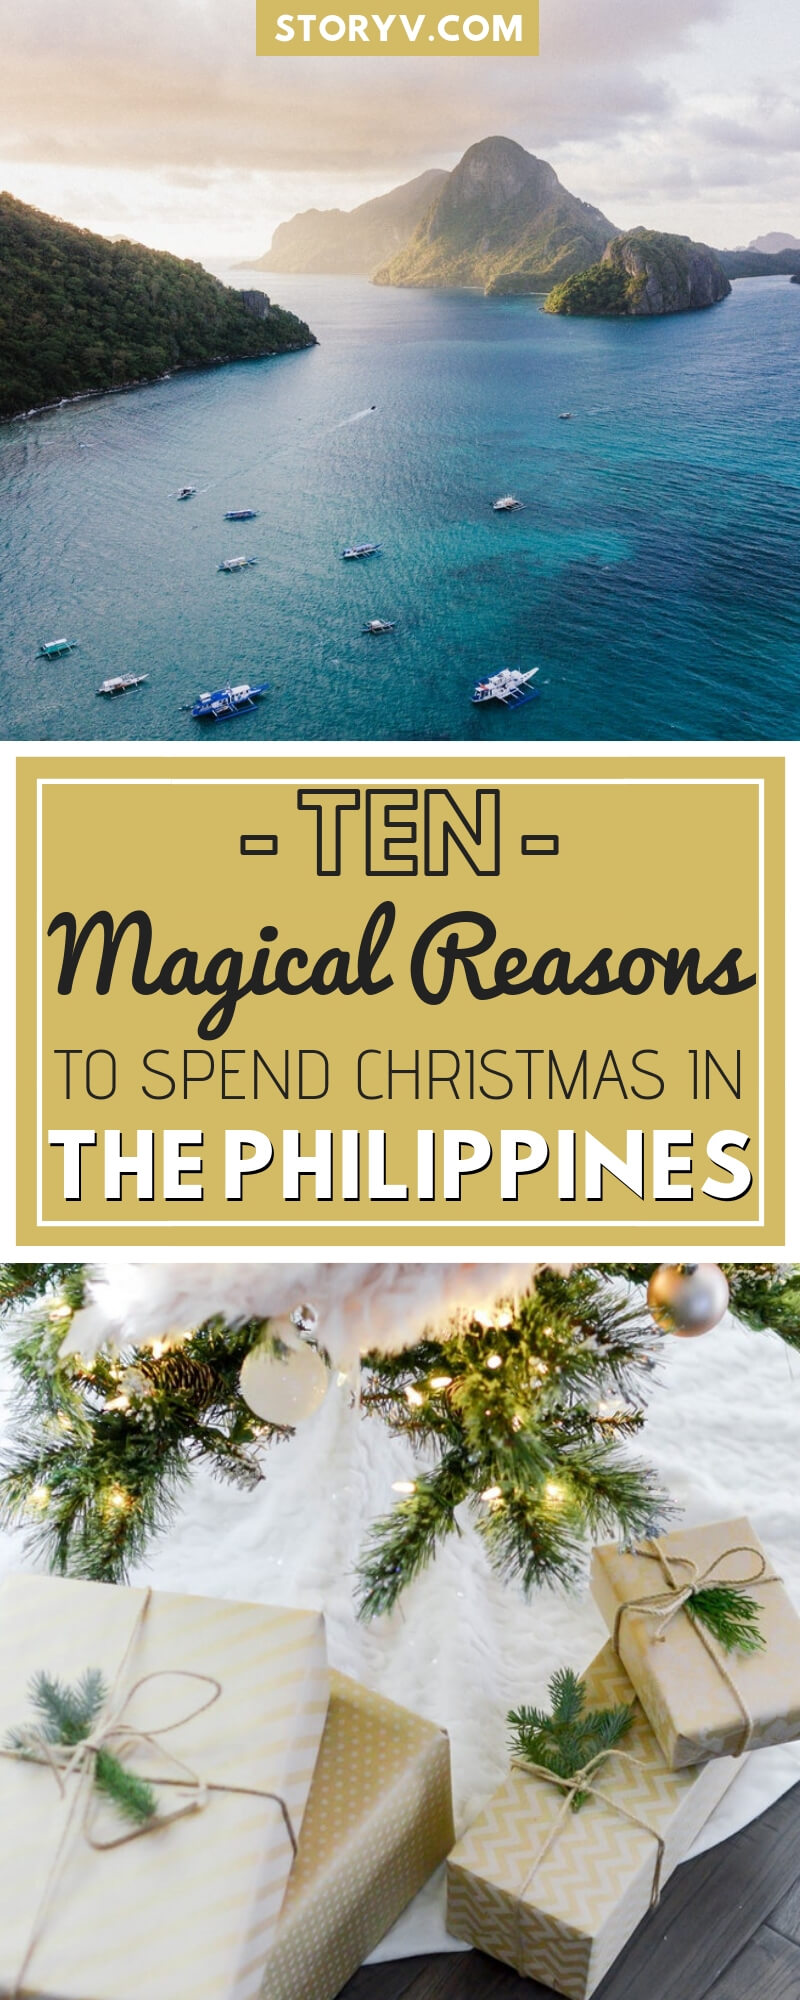 Still thinking about where you should spend your Christmas holidays this year? While it's not the first Christmas holiday destination that generally comes to mind, Christmas in the Philippines is a unique experience not to be missed! Let me convince you with these 10 reasons why....